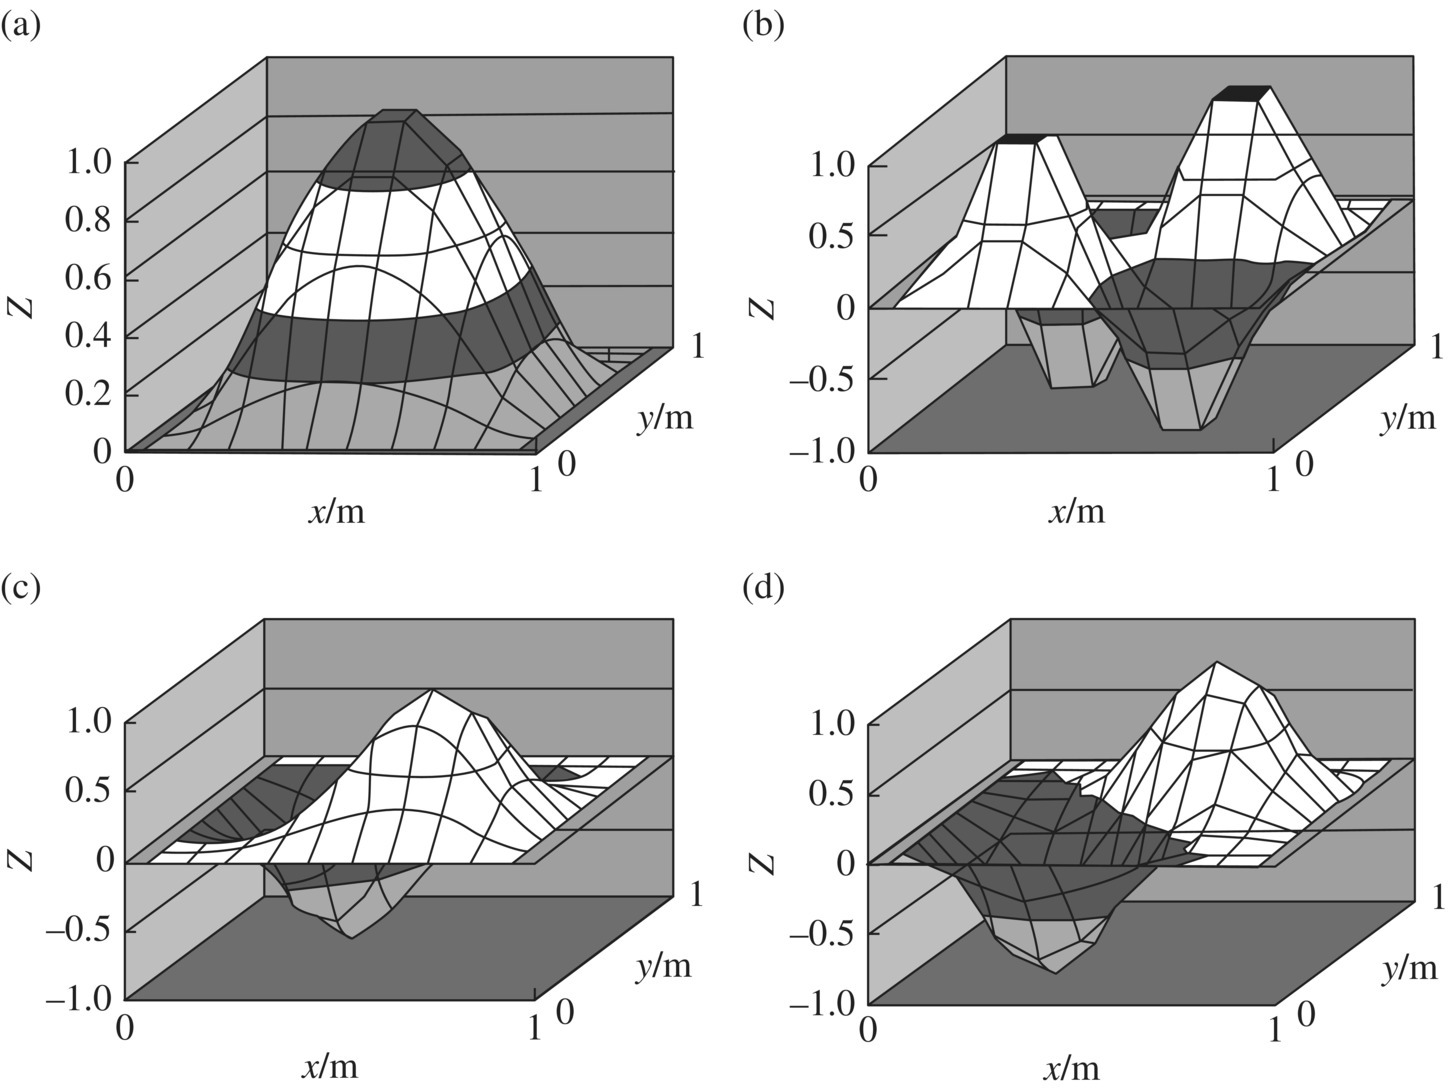 4 Surface graphs of the computational results of mode shapes corresponding to ω1,1 = 65 19 rad/s; ω2,2 = 245 61 rad/s; ω1,2 = 153 29 rad/s; and ω2,1 = 153 29 rad/s.